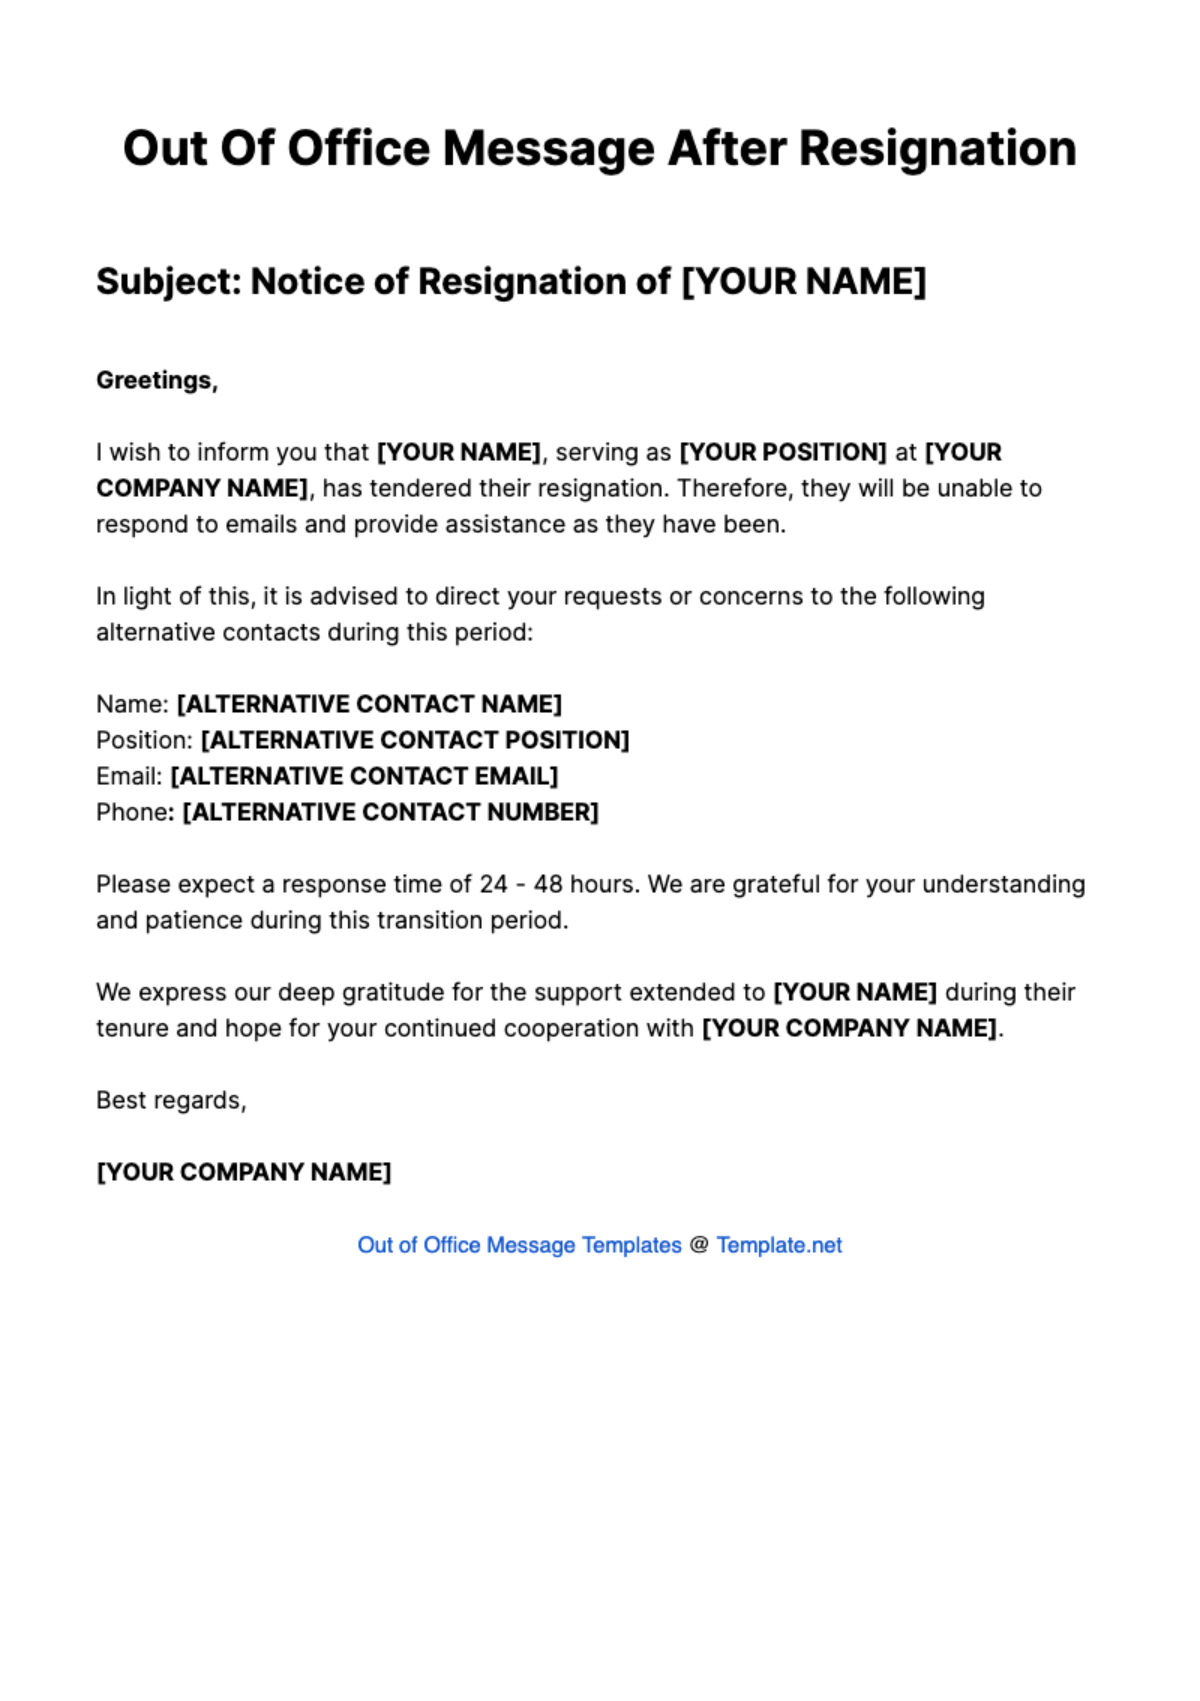 Out Of Office Message After Resignation Template